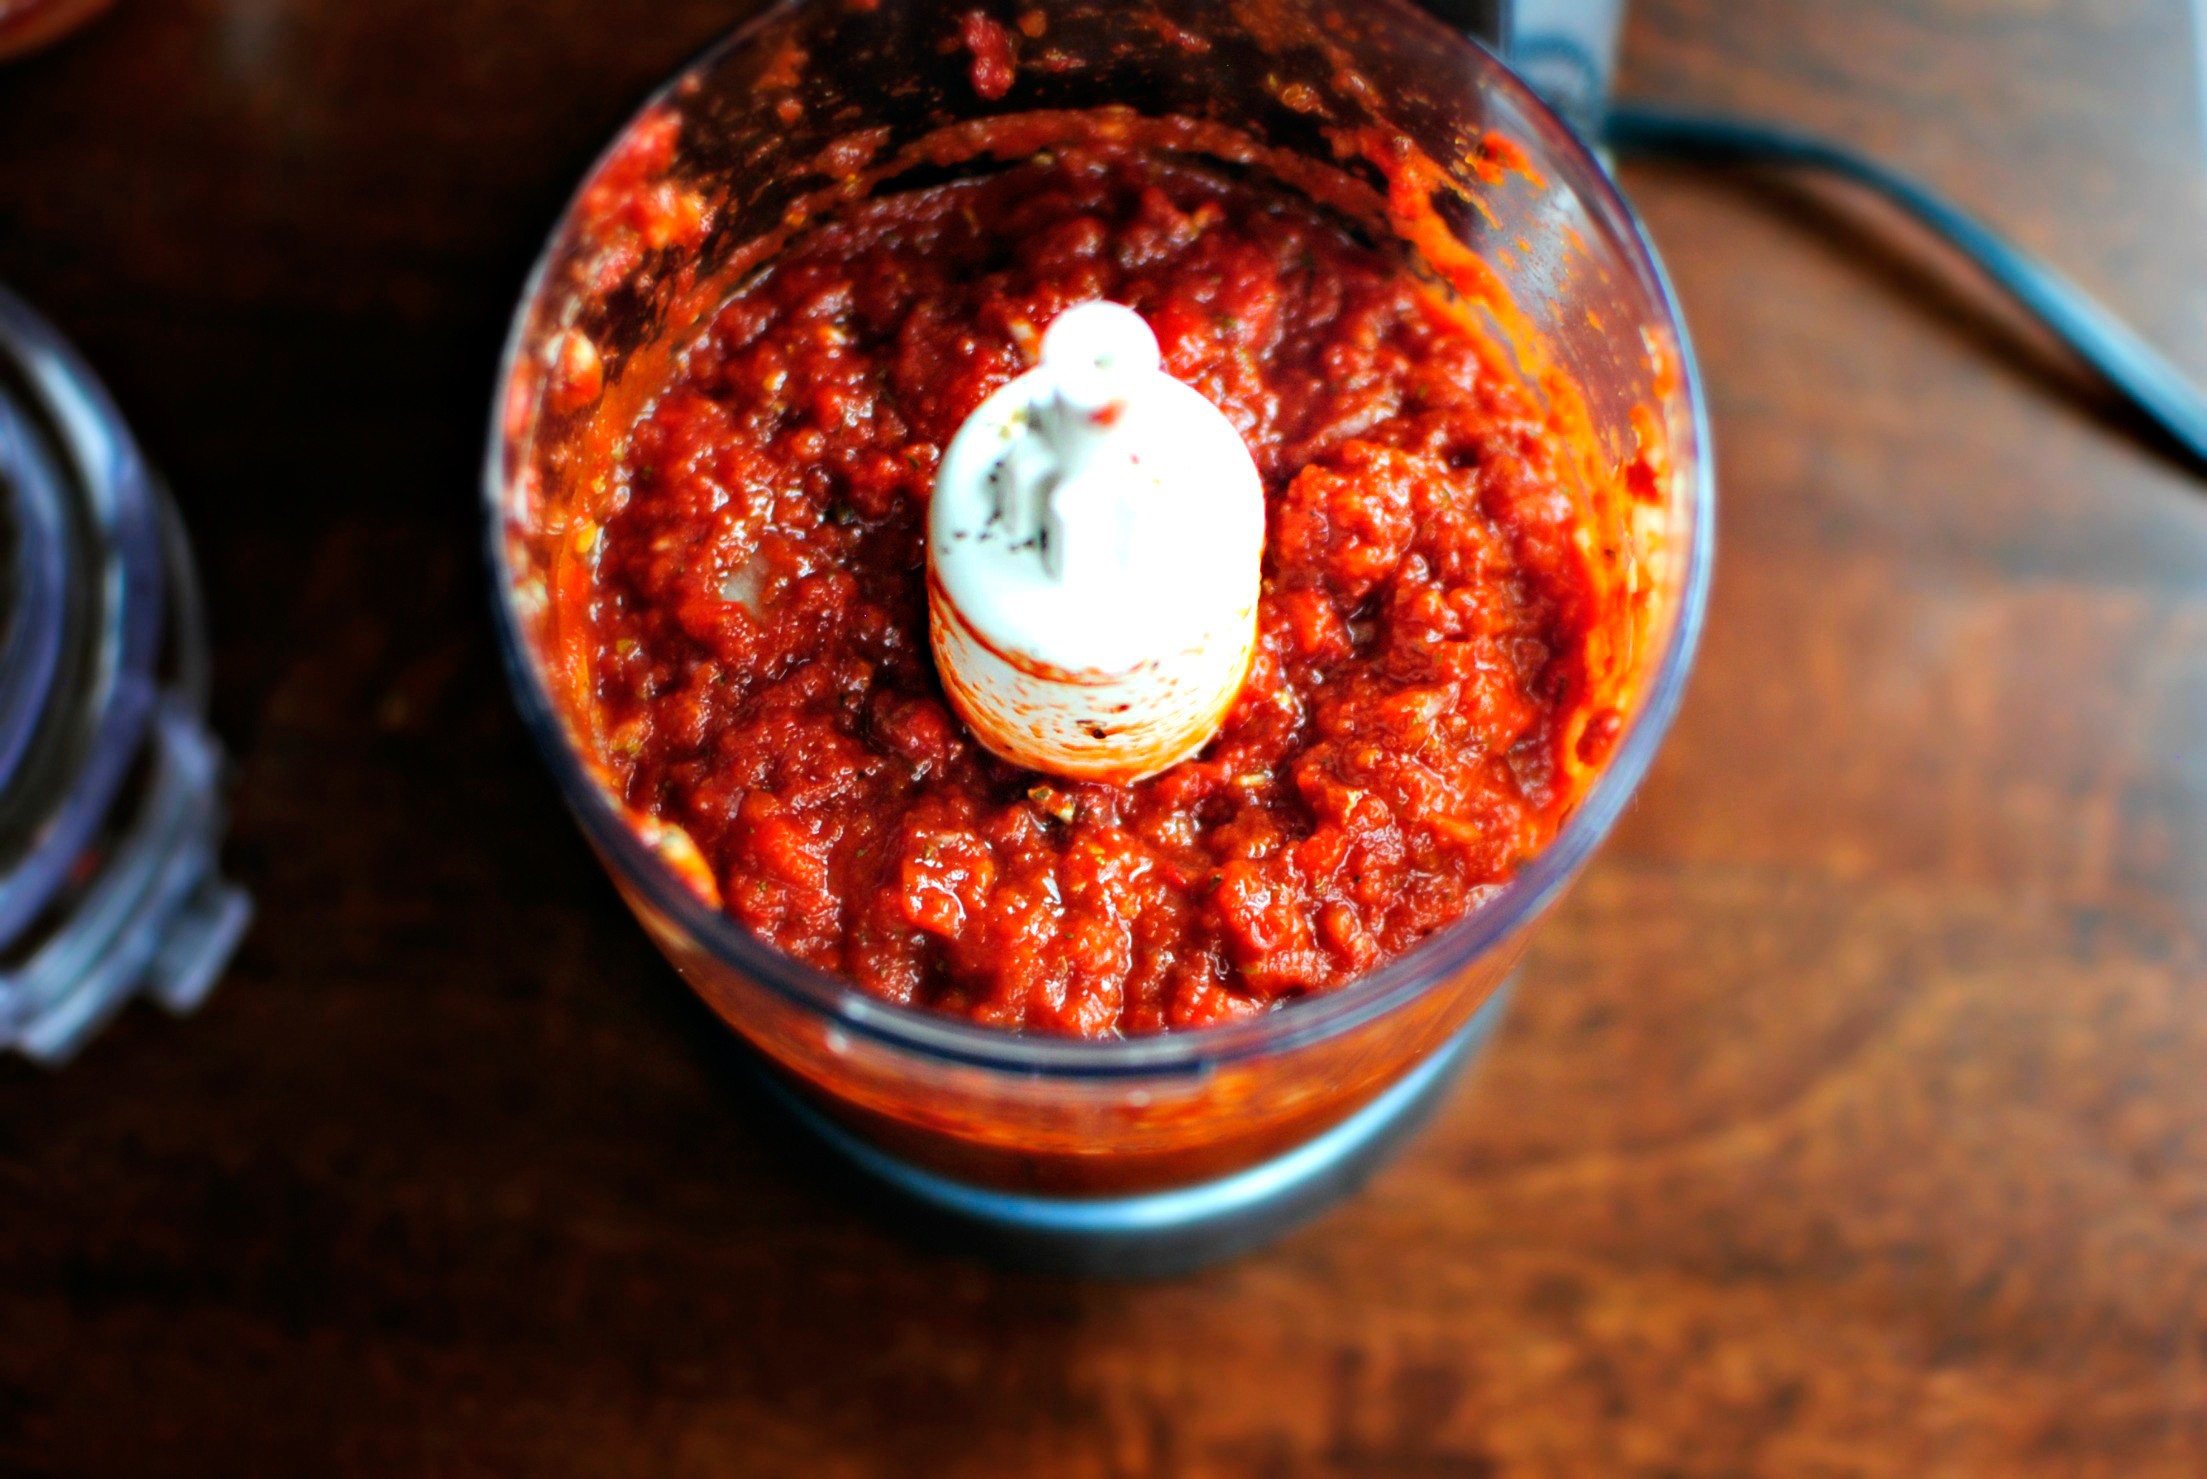 Tasty Kitchen Blog: Roasted Red Pepper Pizza Sauce. Guest post by Laurie McNamara of Simply Scratch, recipe submitted by TK member Leanne.